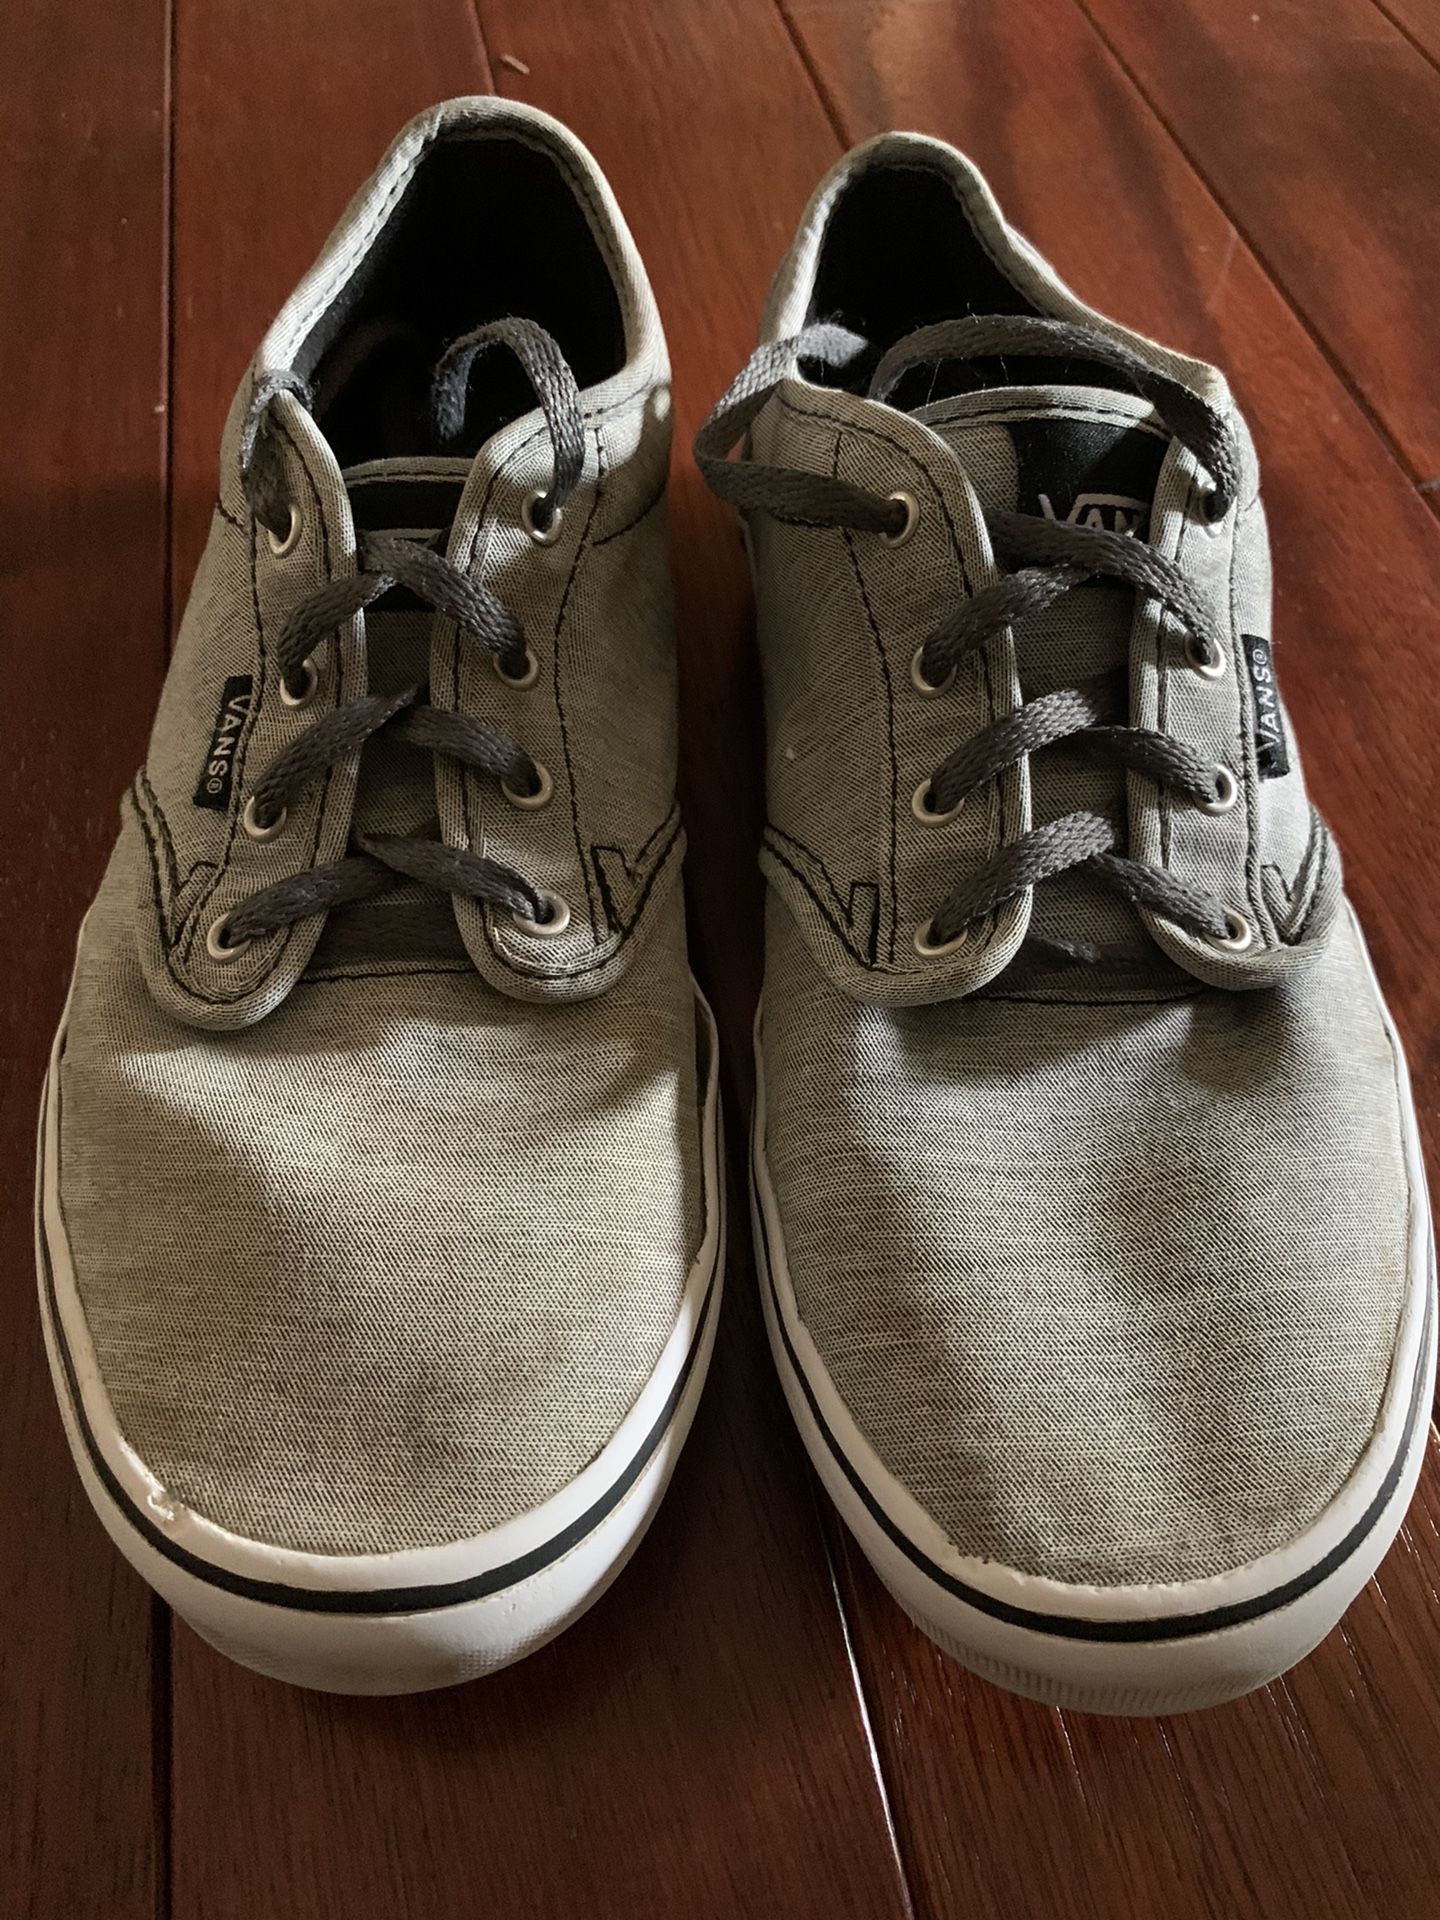 Vans Boys Shoes. Youth Size 7